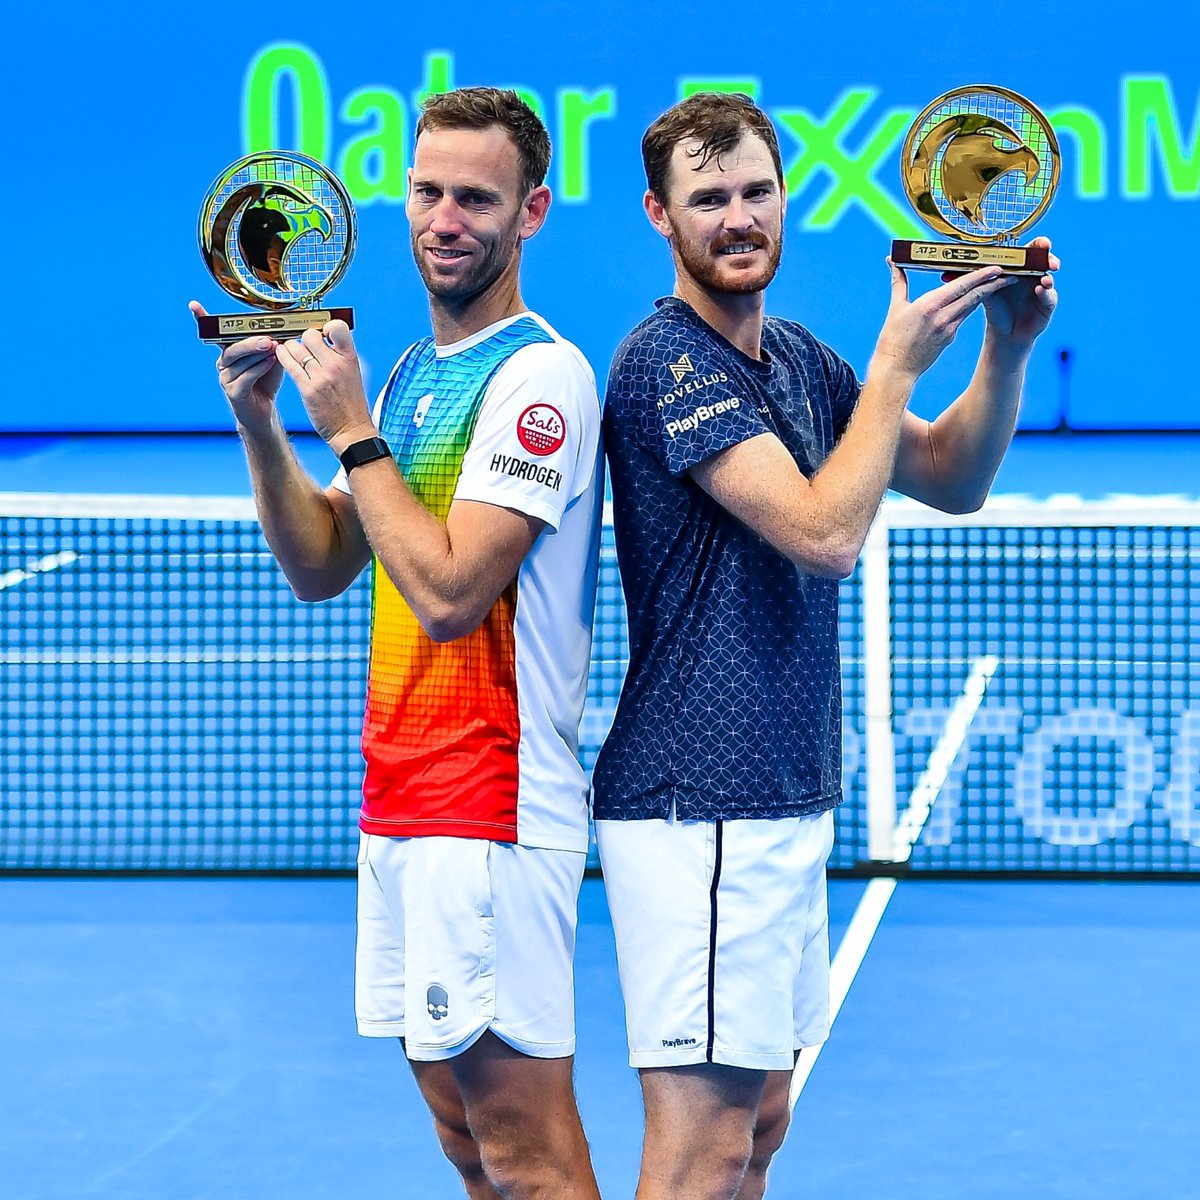 Another Double of Doubles 🏆🏆 Max Purcell wins in Los Cabos with partner Jordan Thompson and Jamie Murray wins in Doha with partner Michael Venus! #TeamDunlop #TeamDoubles